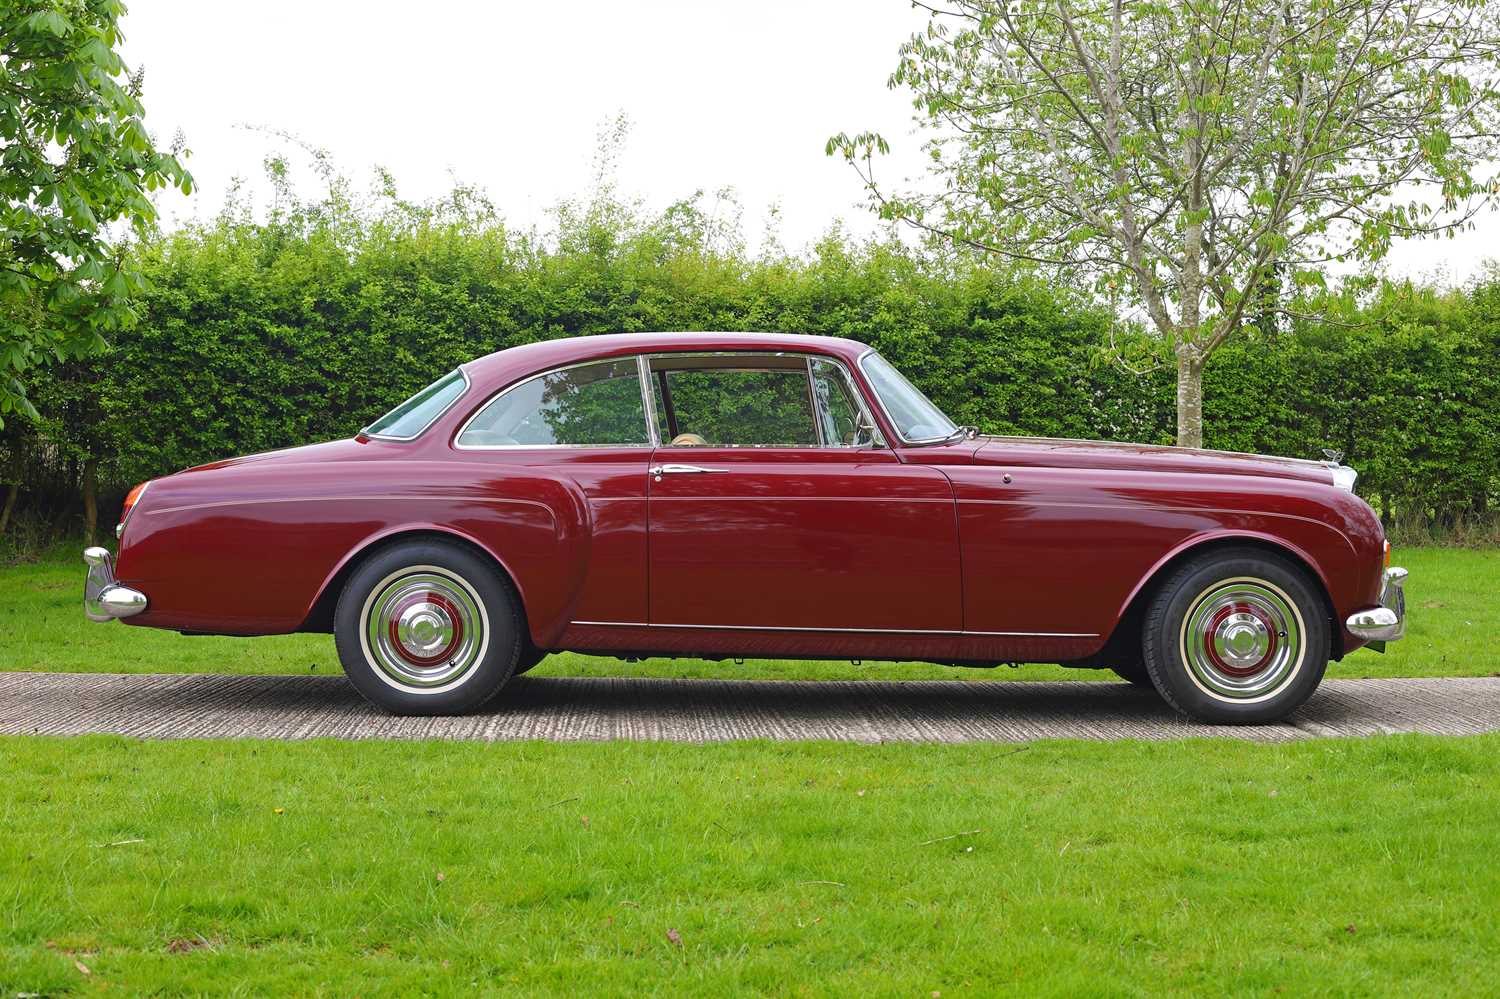 1963 Bentley S3 Continental Coupé - Image 2 of 43